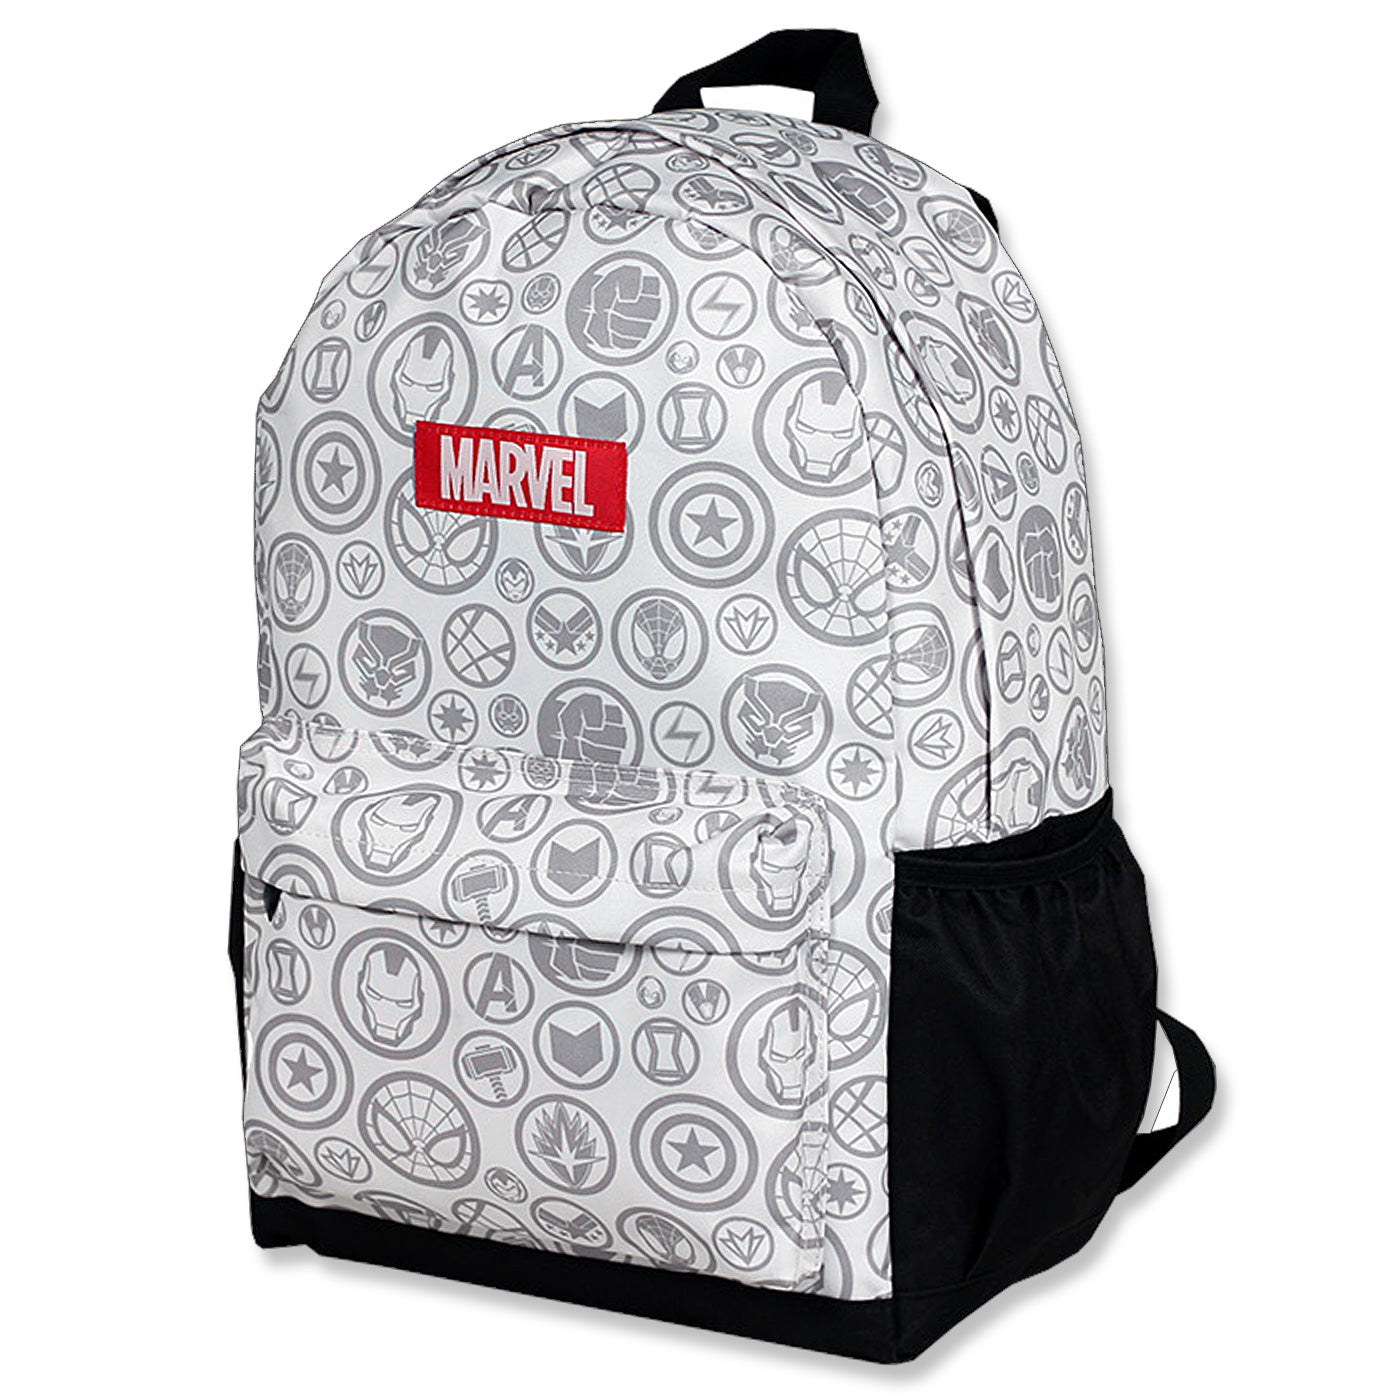 Avengers Backpack for Teens and Adults Grey